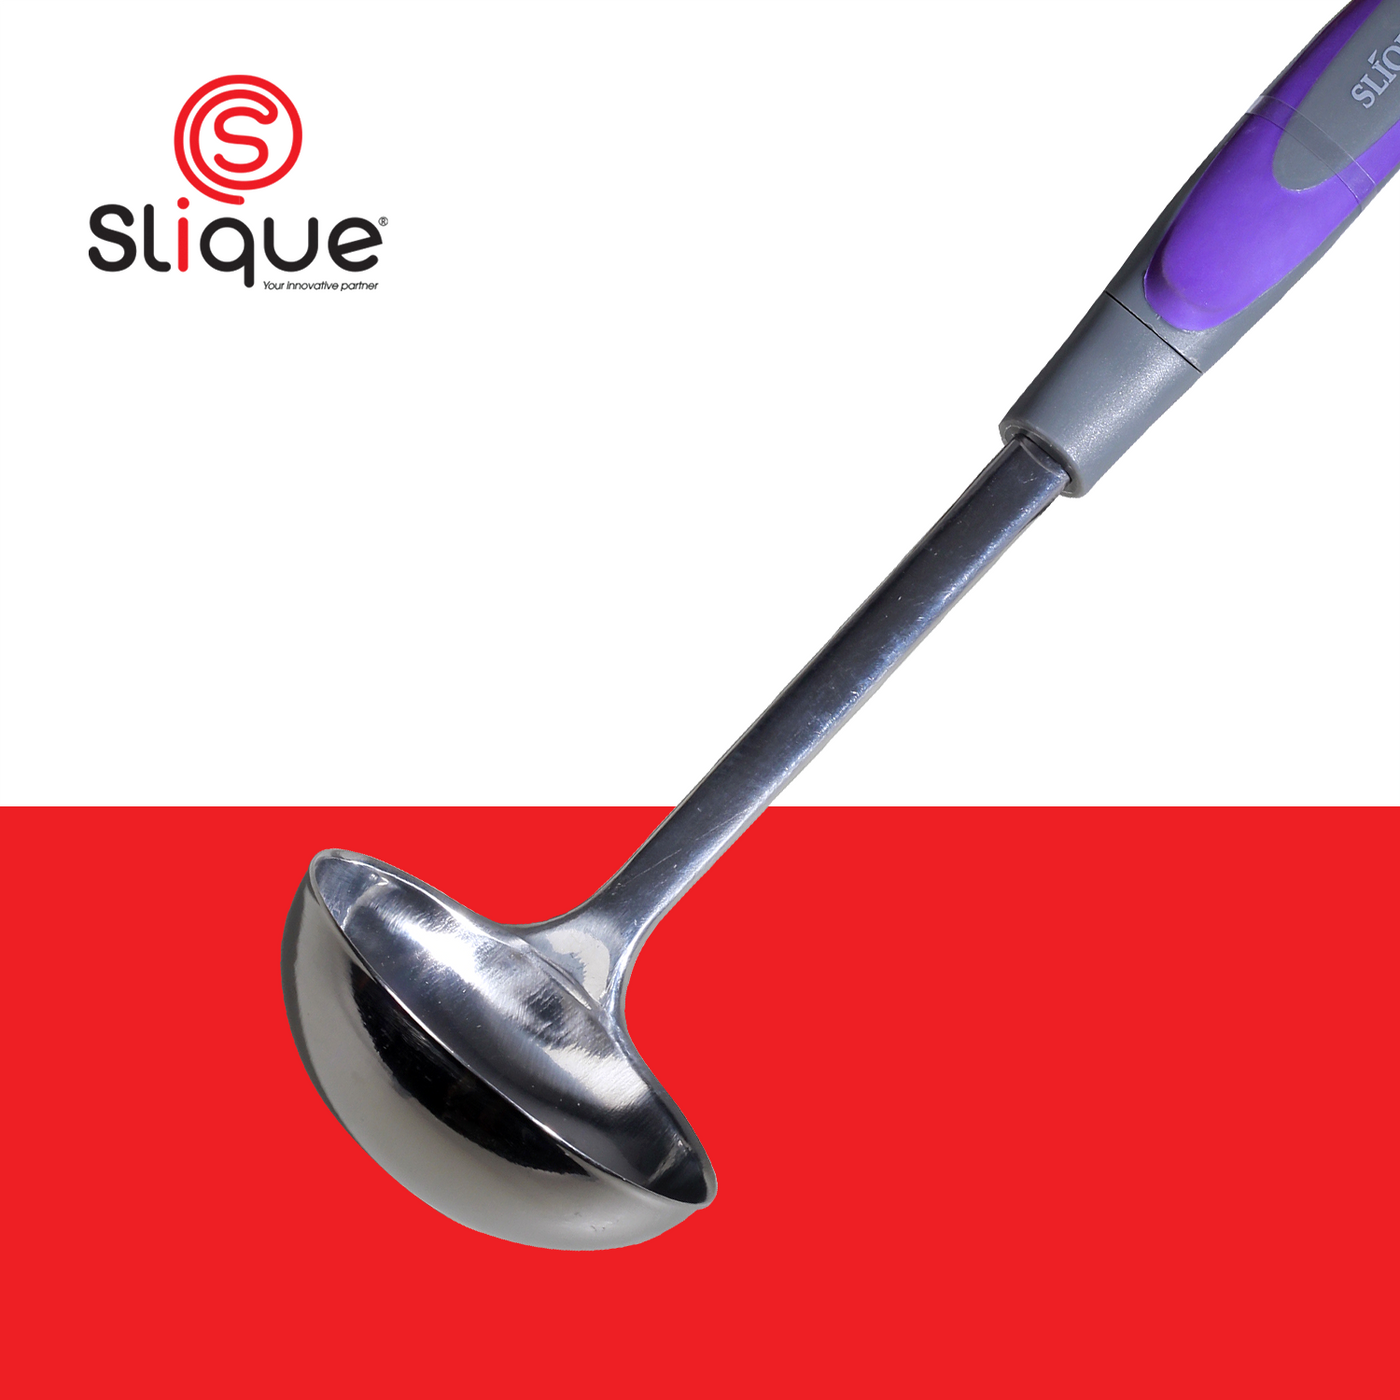 SLIQUE Premium 18/8 Stainless Steel Ladle TPR Silicone Handle Kitchen Essentials Amazing Gift Idea For Any Occasion! (Purple)